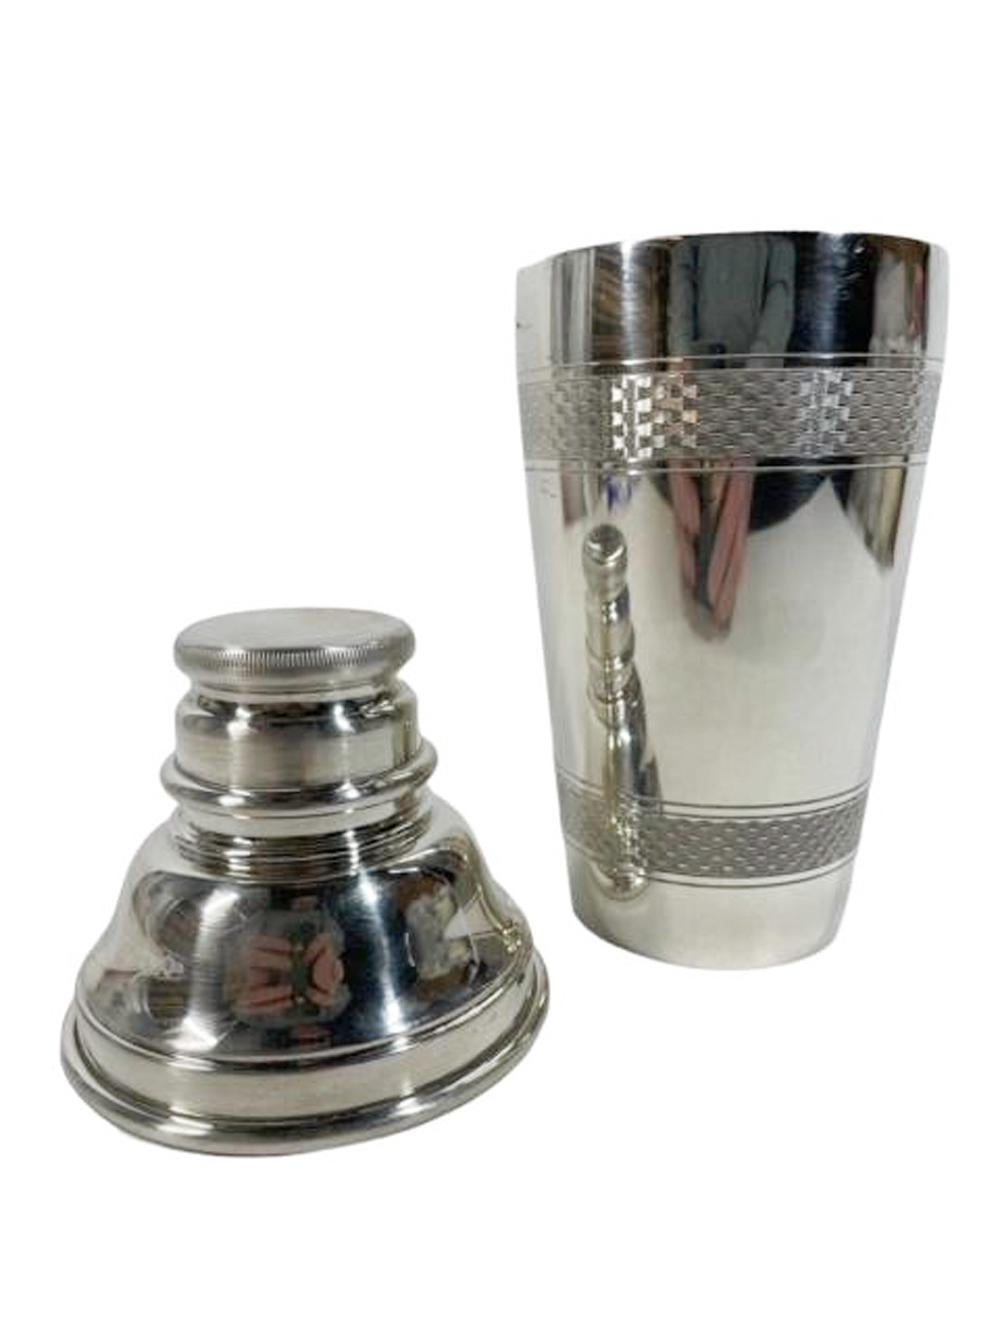 Art Deco silver plate cocktail shaker of cobbler form and having bands of engine turned decoration. 